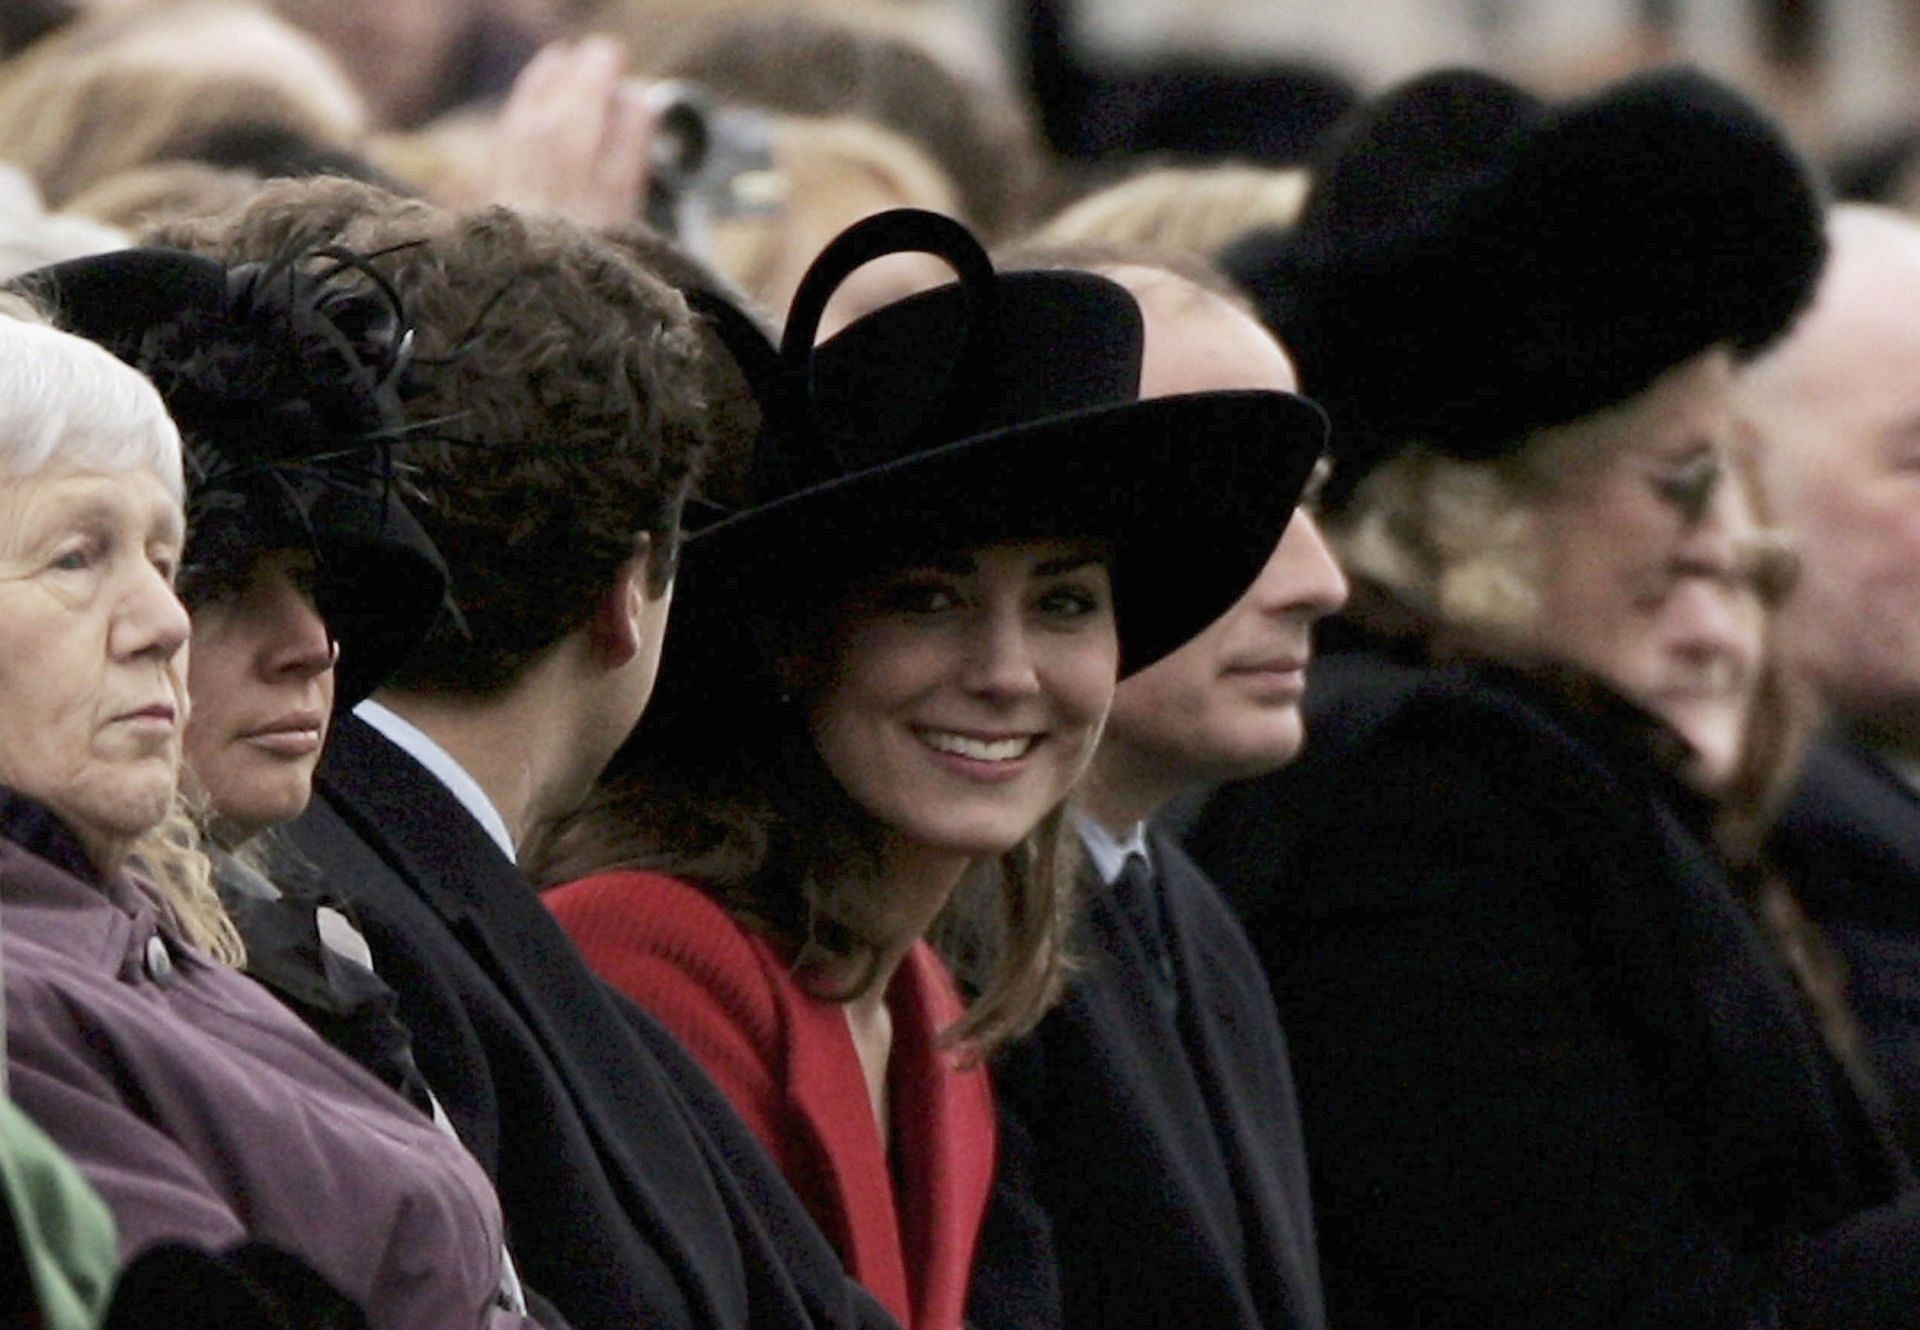 HRH Prince William&#039;s girlfriend Kate Middleton (C) looks around while watching William take part in The Sovereign&#039;s Parade - December 15, 2006 (Image via Getty)